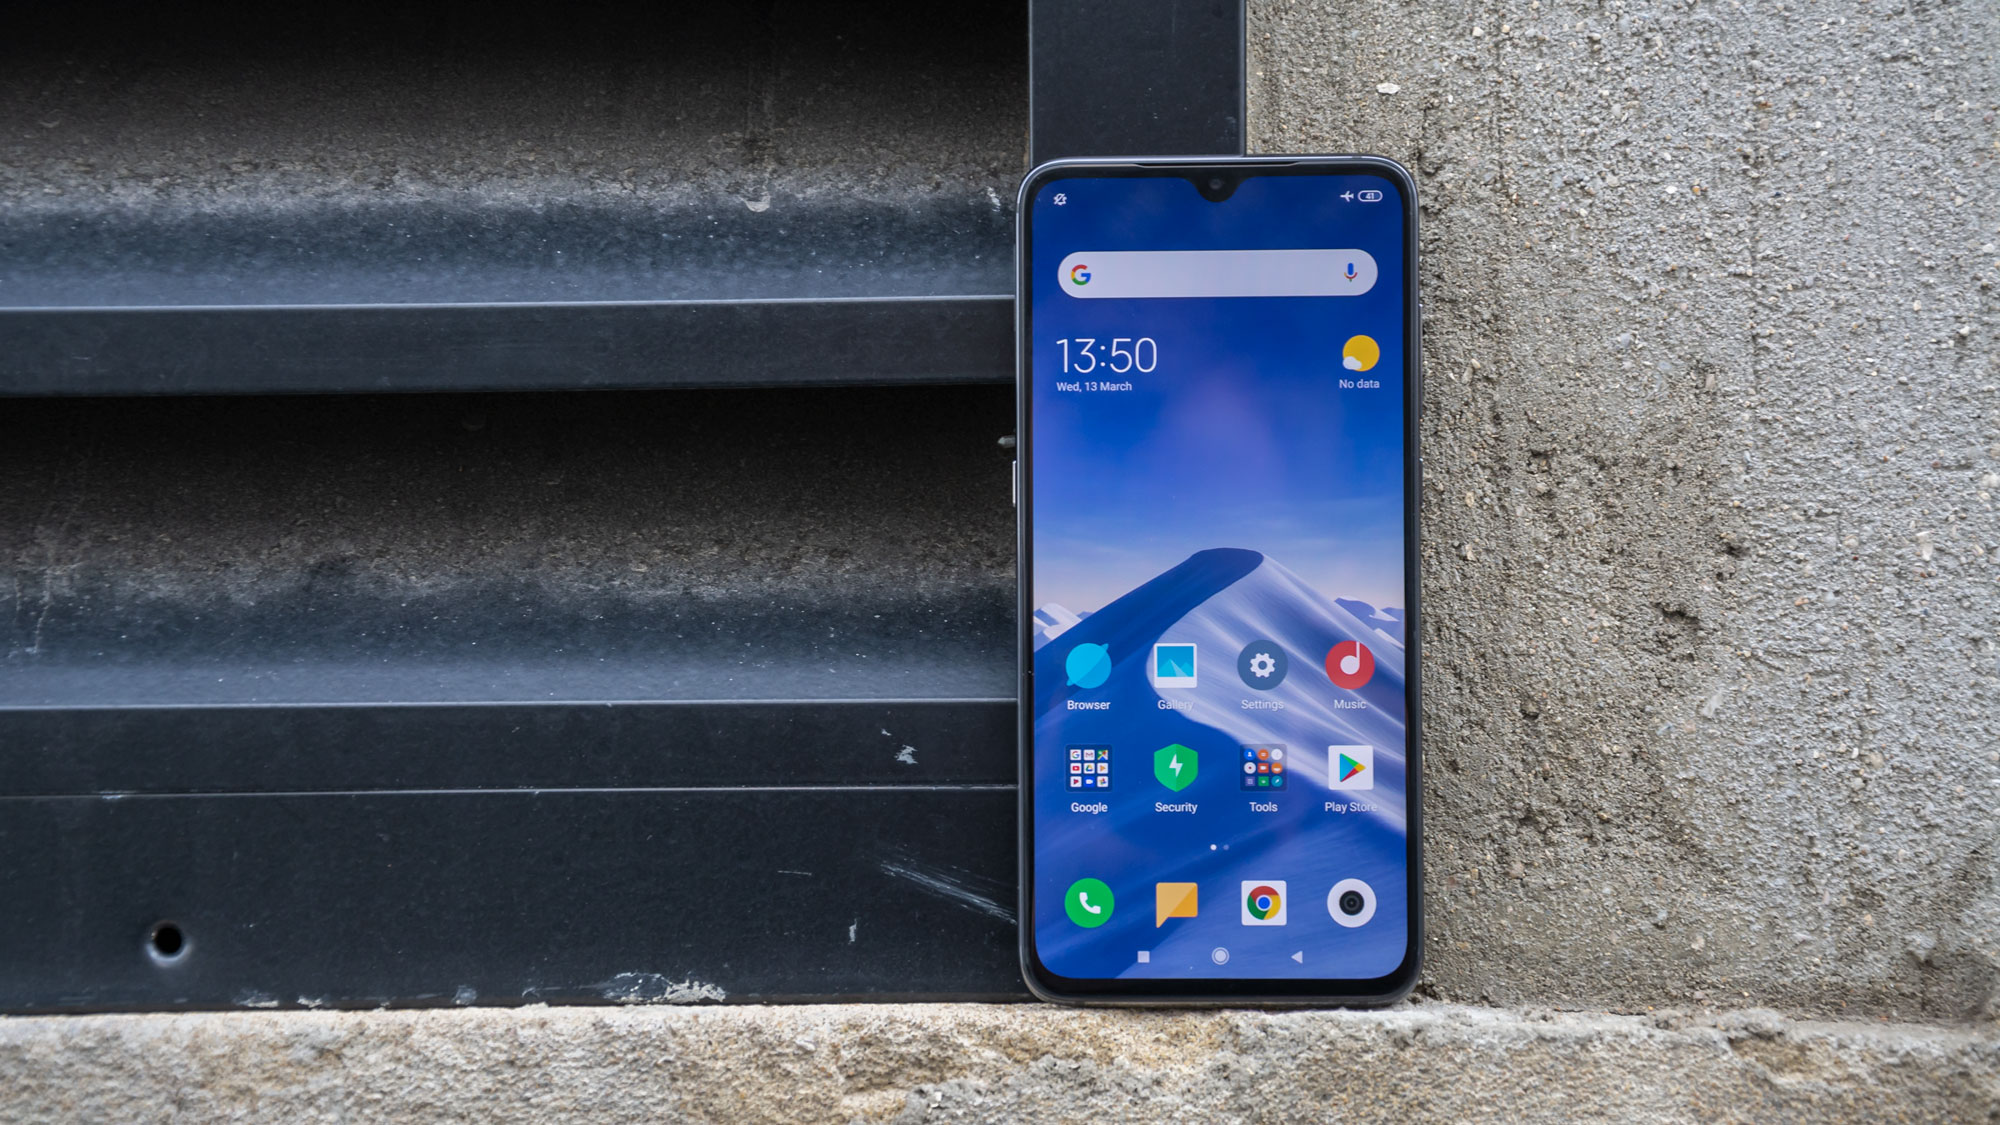 Mi 9 Launched March 30th 2019 in Philippines!